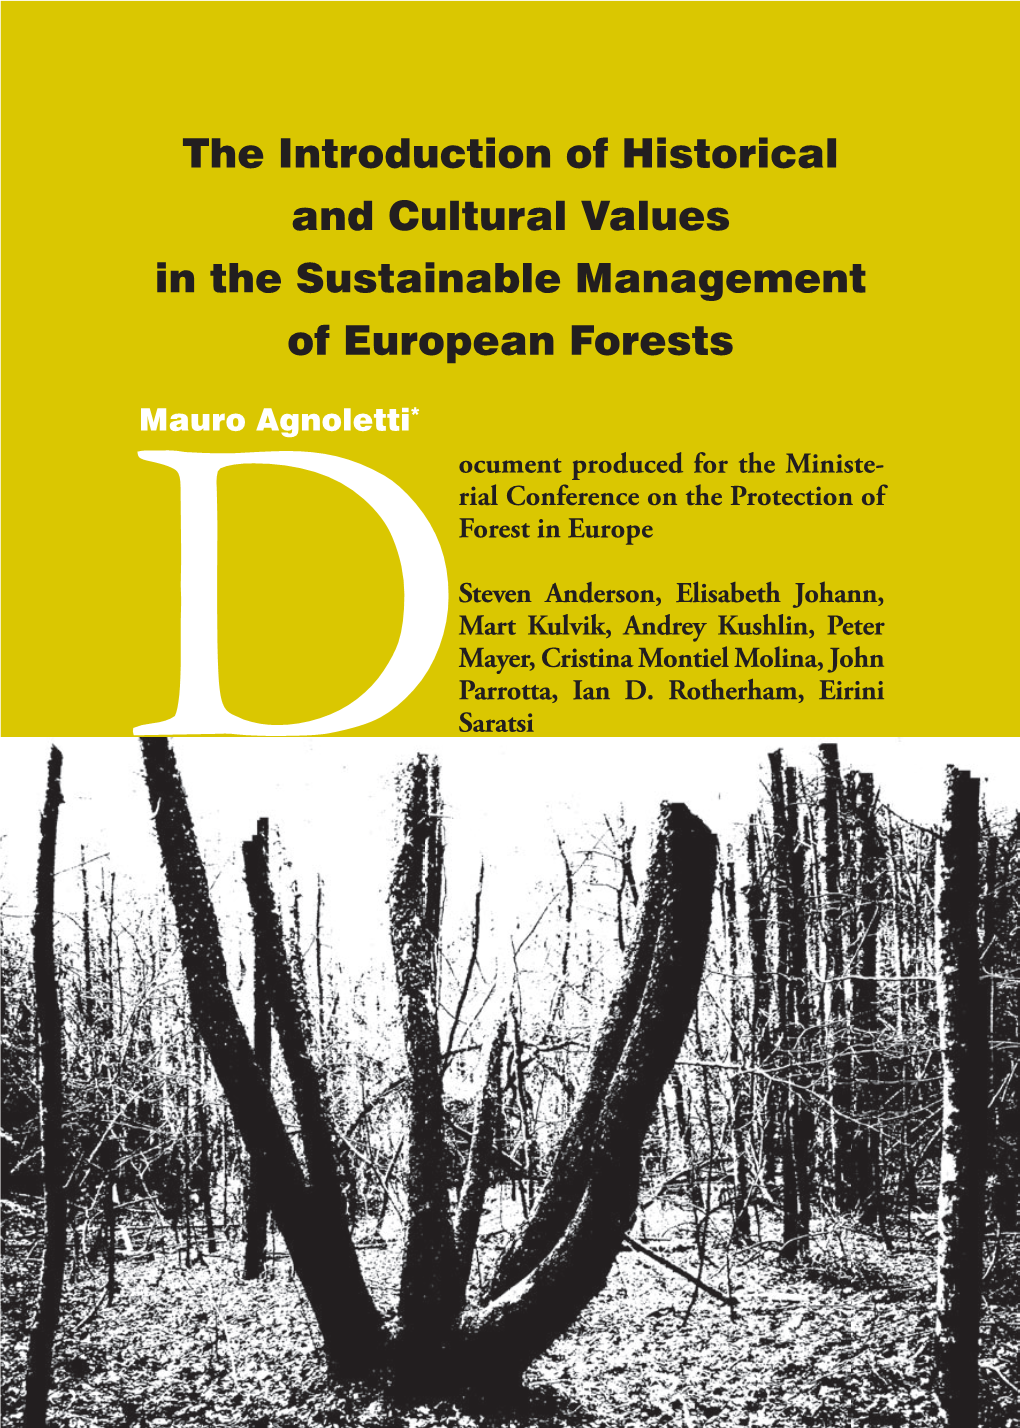 The Introduction of Historical and Cultural Values in the Sustainable Management of European Forests